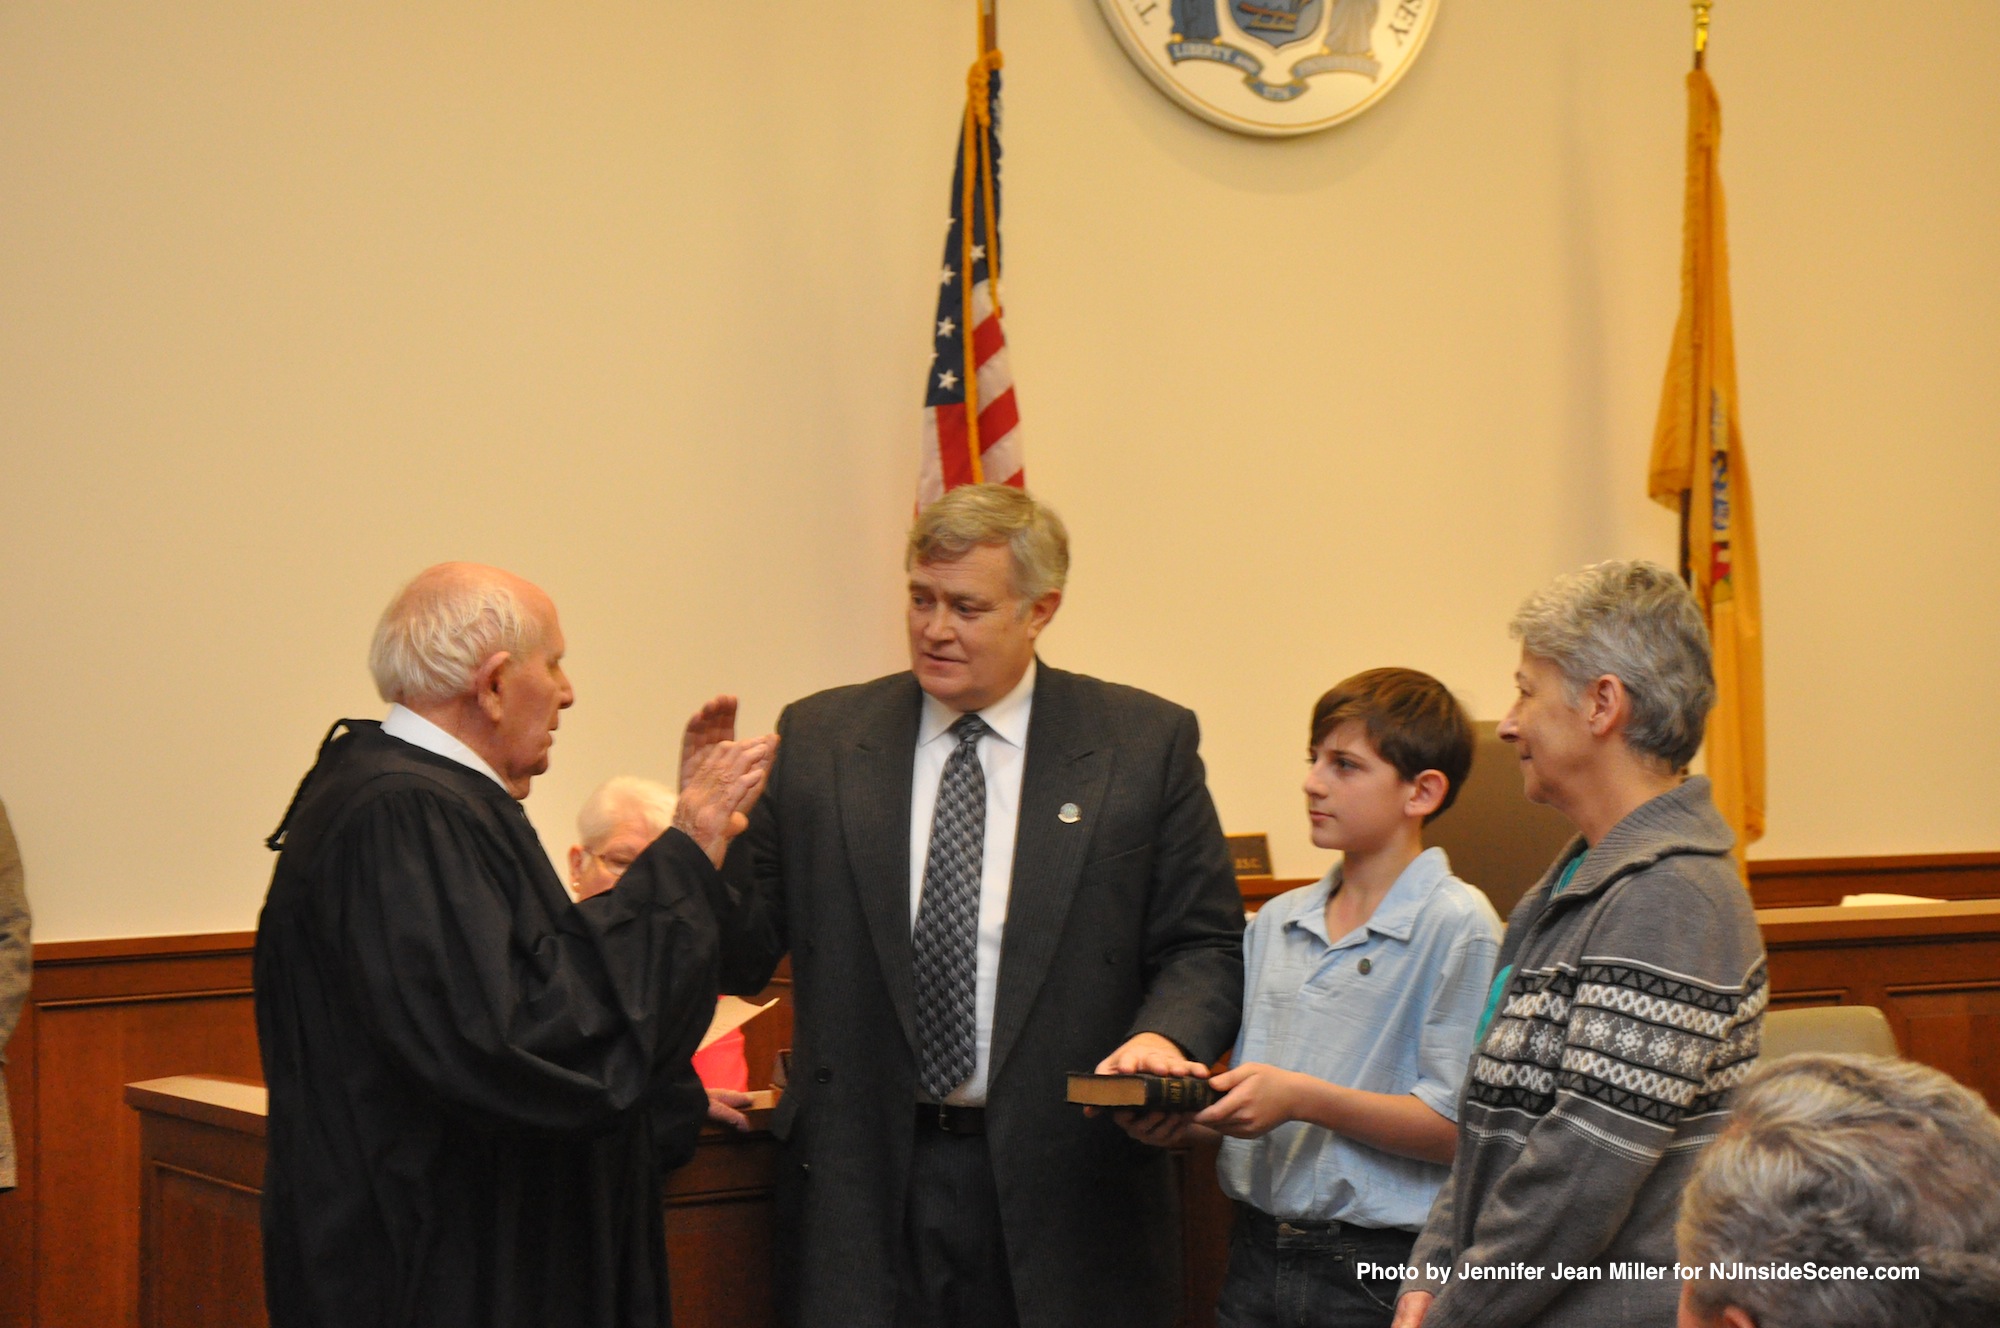 Judge Frederic Weber swears in George Graham, while Graham's wife, Gail, and grandson, Seth, look on.